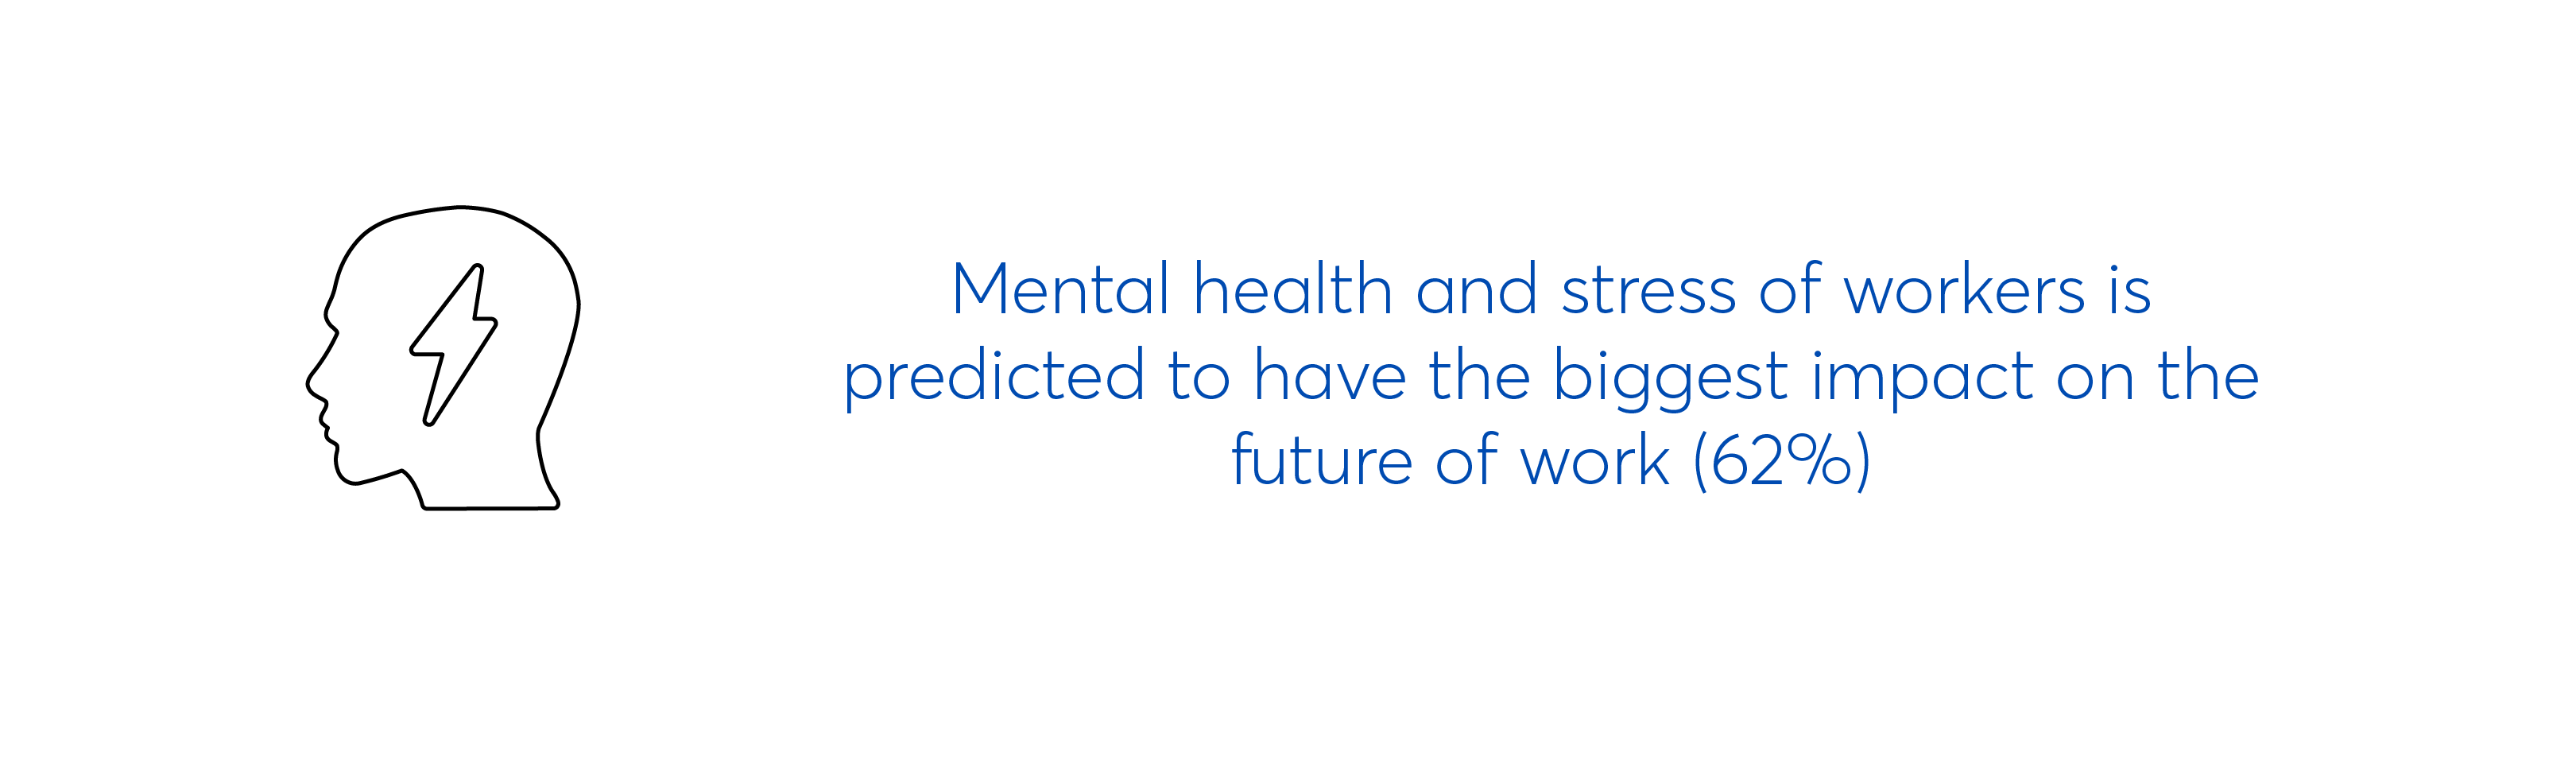 Mental Health and Stress have the biggest impact on work